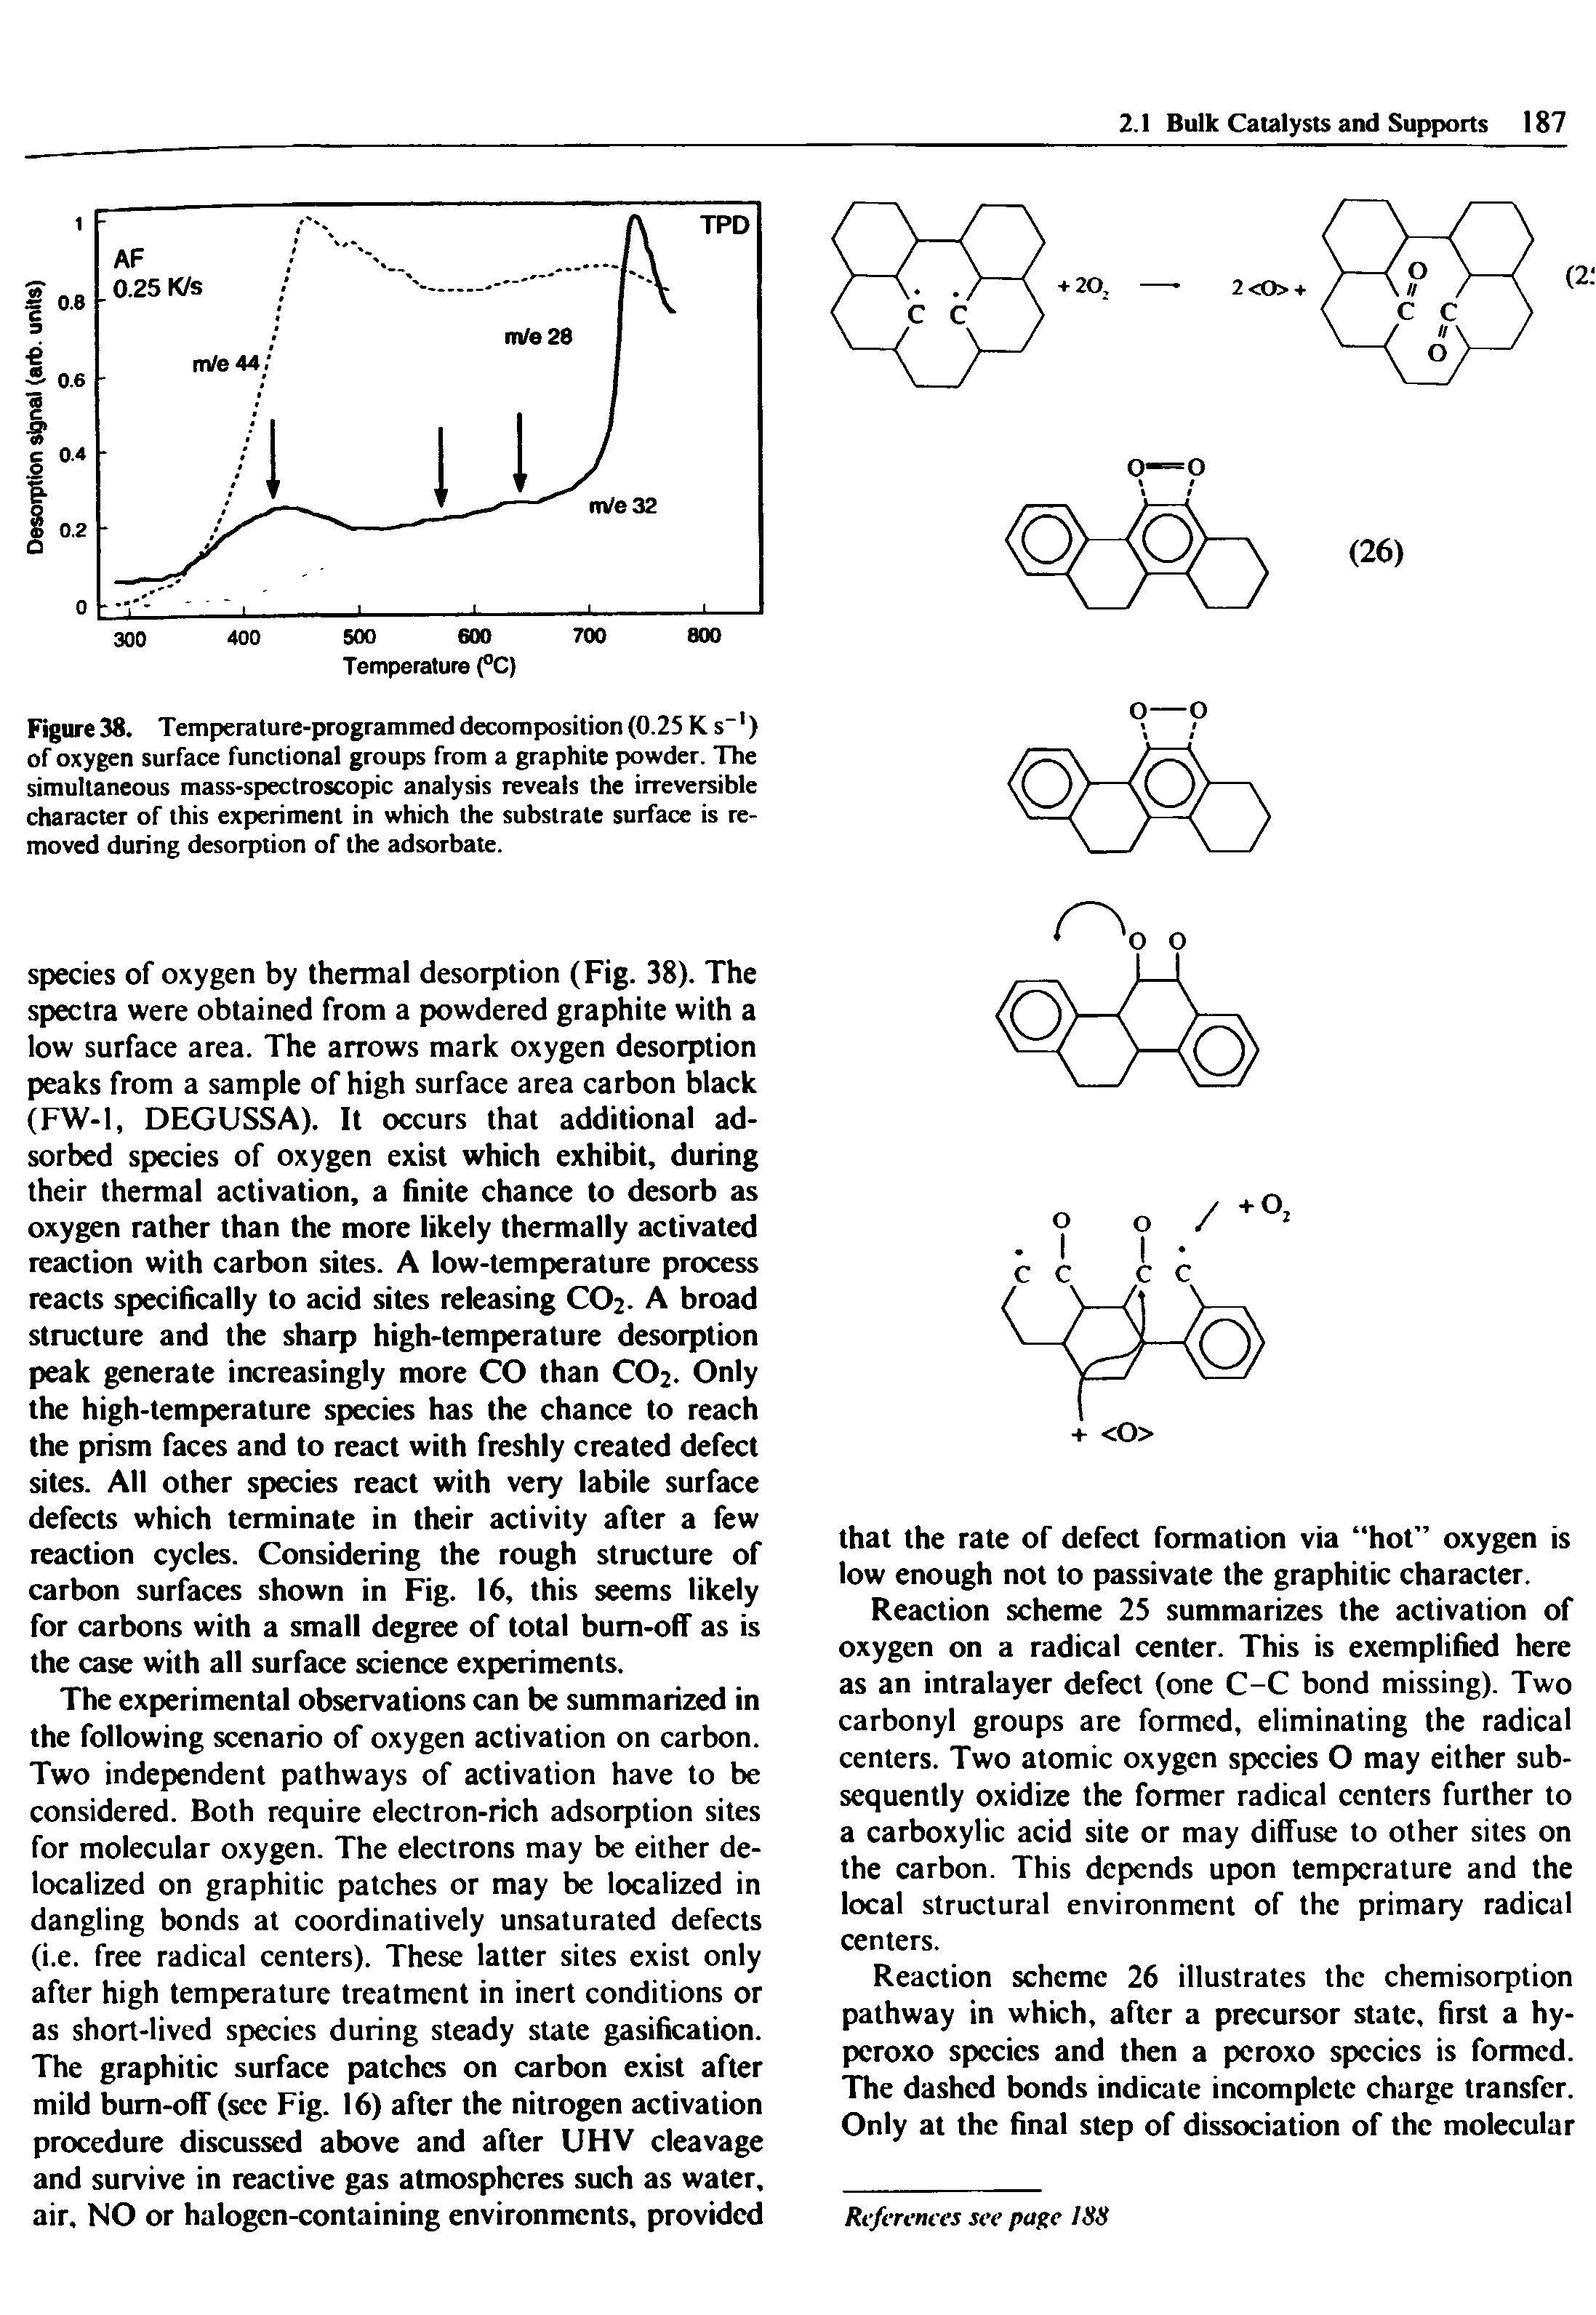 Figure 38. Temperature-programmed decomposition (0.25 K s 1) of oxygen surface functional groups from a graphite powder. The simultaneous mass-spectroscopic analysis reveals the irreversible character of this experiment in which the substrate surface is removed during desorption of the adsorbate.